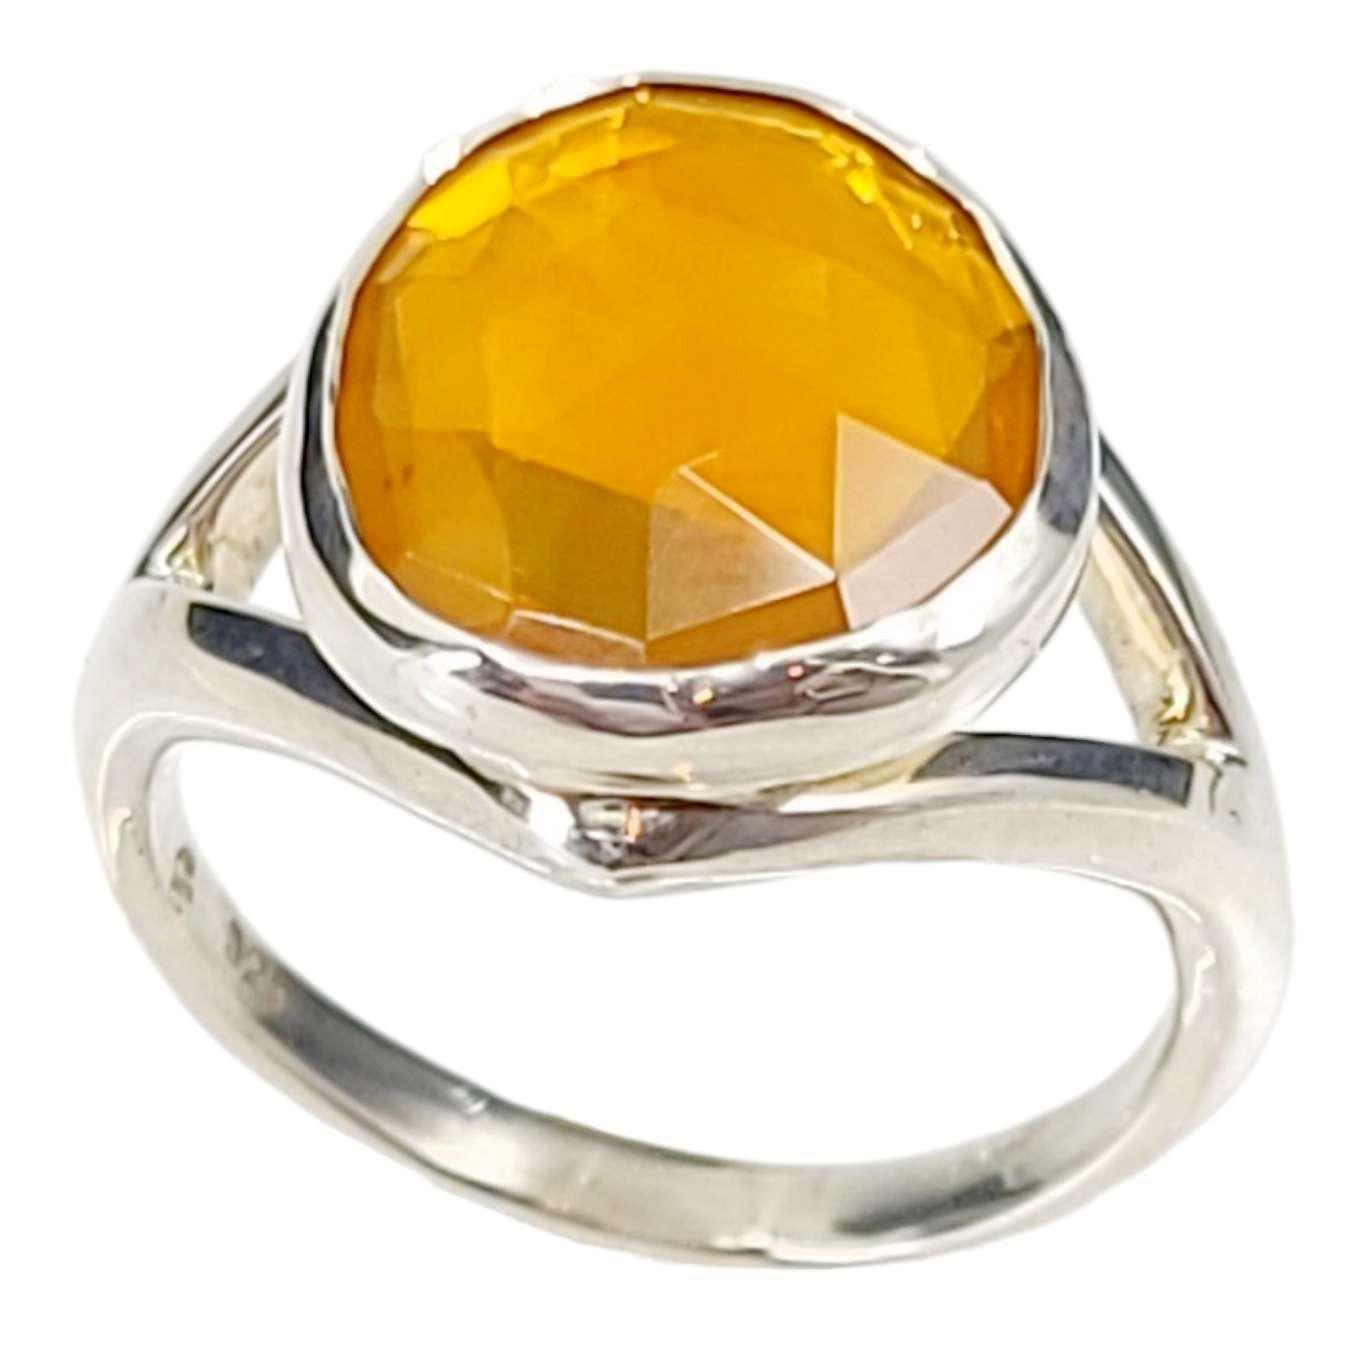 Ring - Size 7 - Cleo in Fire Opal and Sterling Silver by Corey Egan